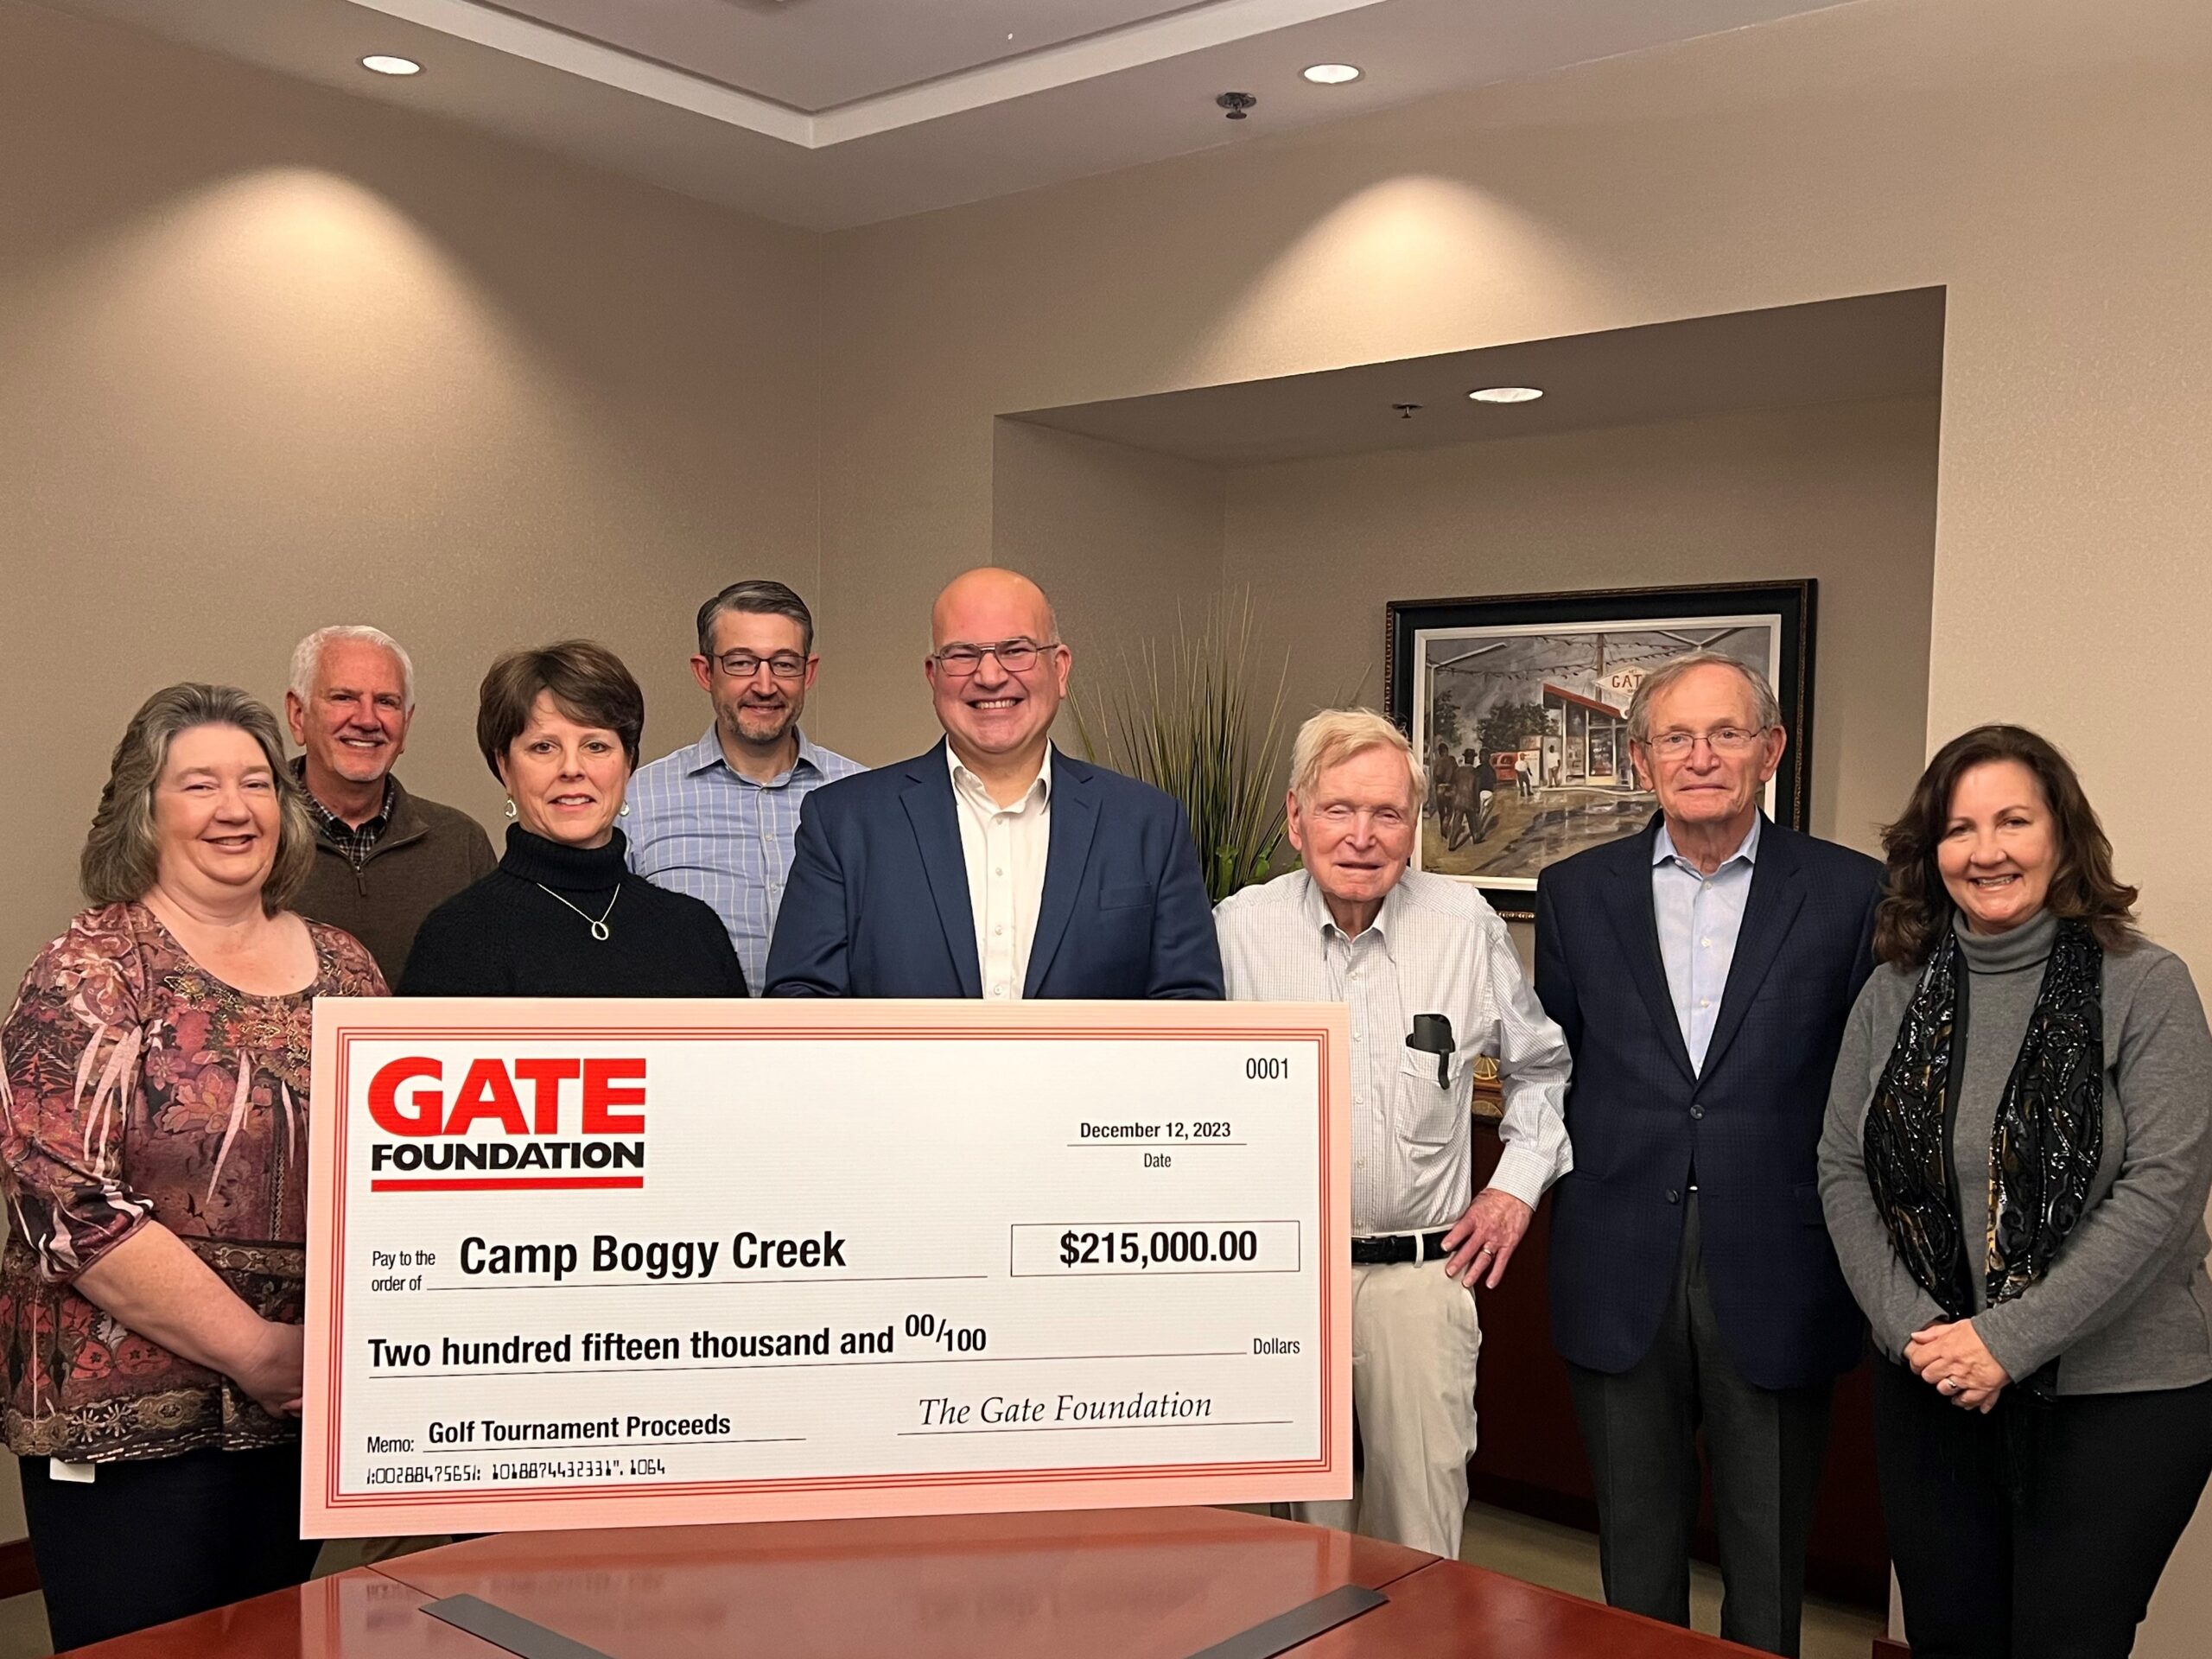 The GATE Foundation Annual Charity Golf Tournament Raises $215,000 for Camp Boggy Creek